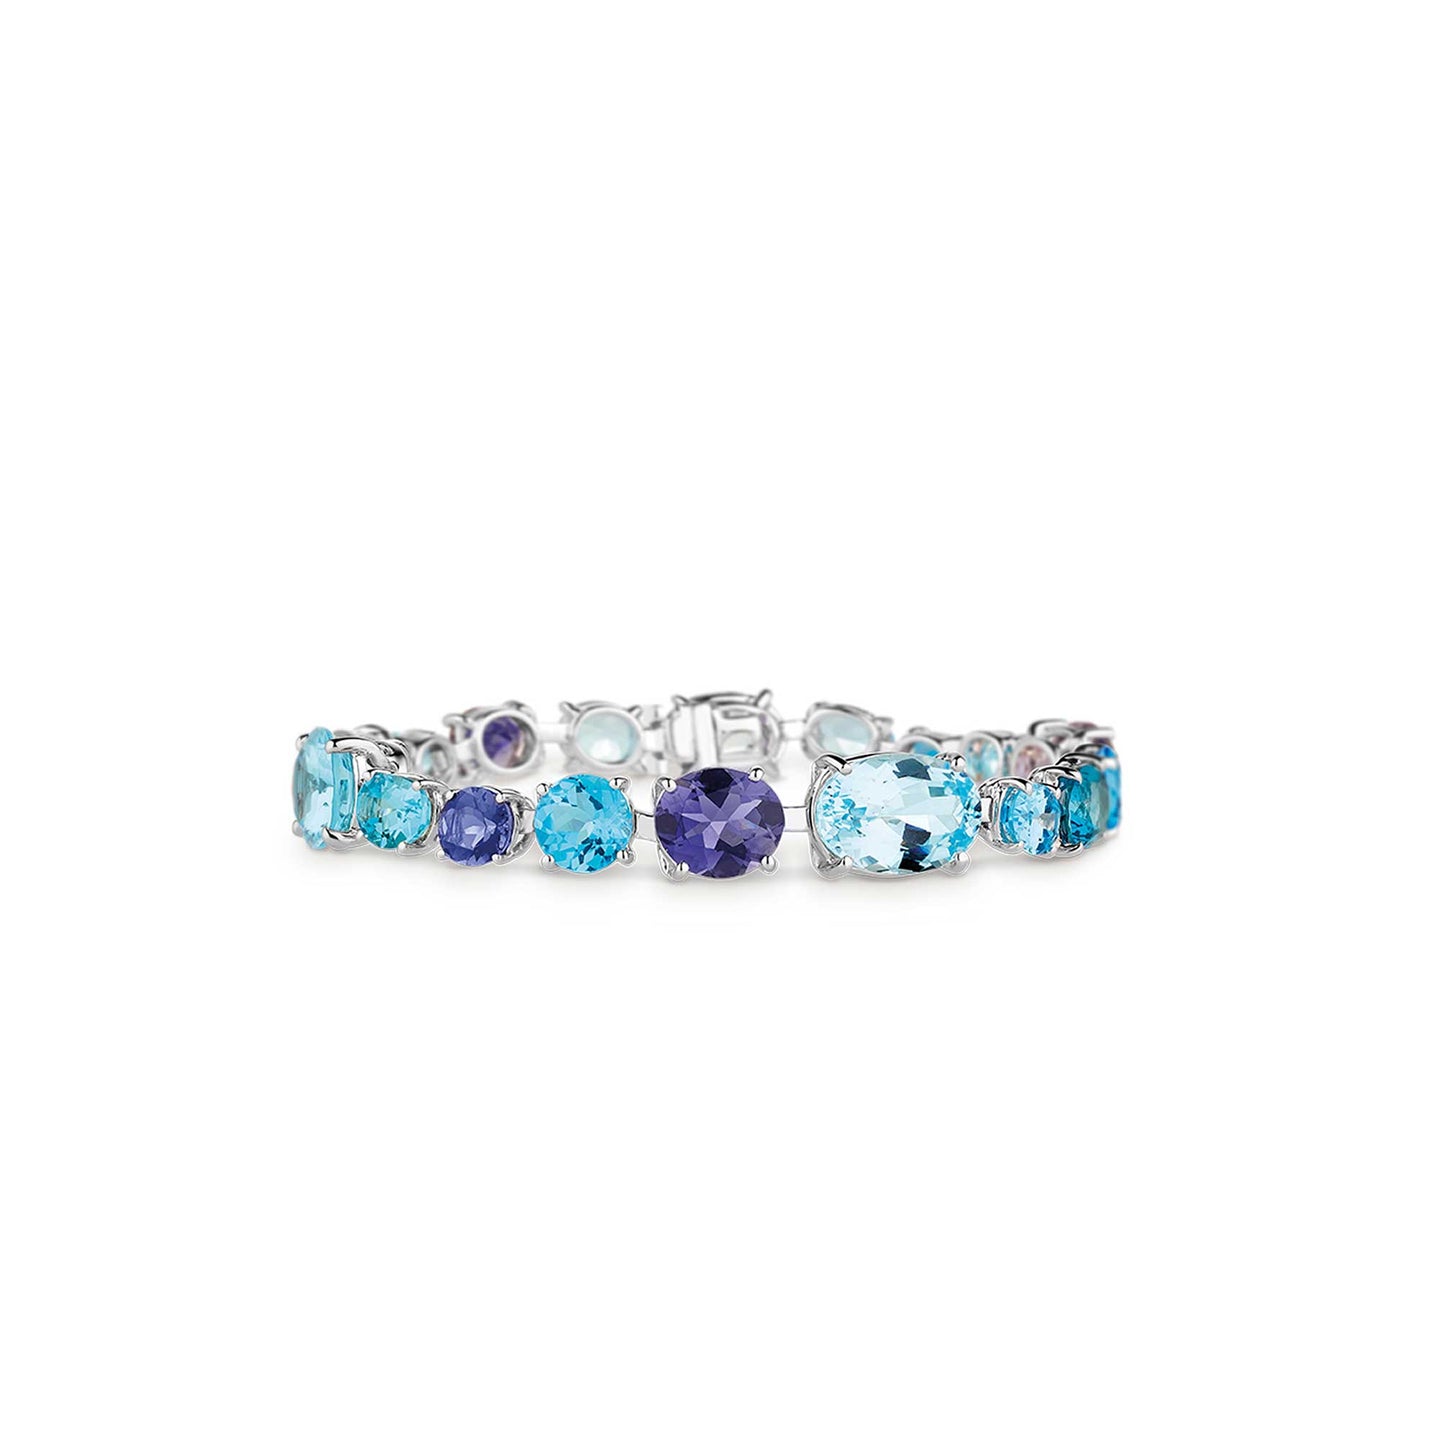 Chaos Bracelet in 18ct White Gold with Blue Topaz and Iolites